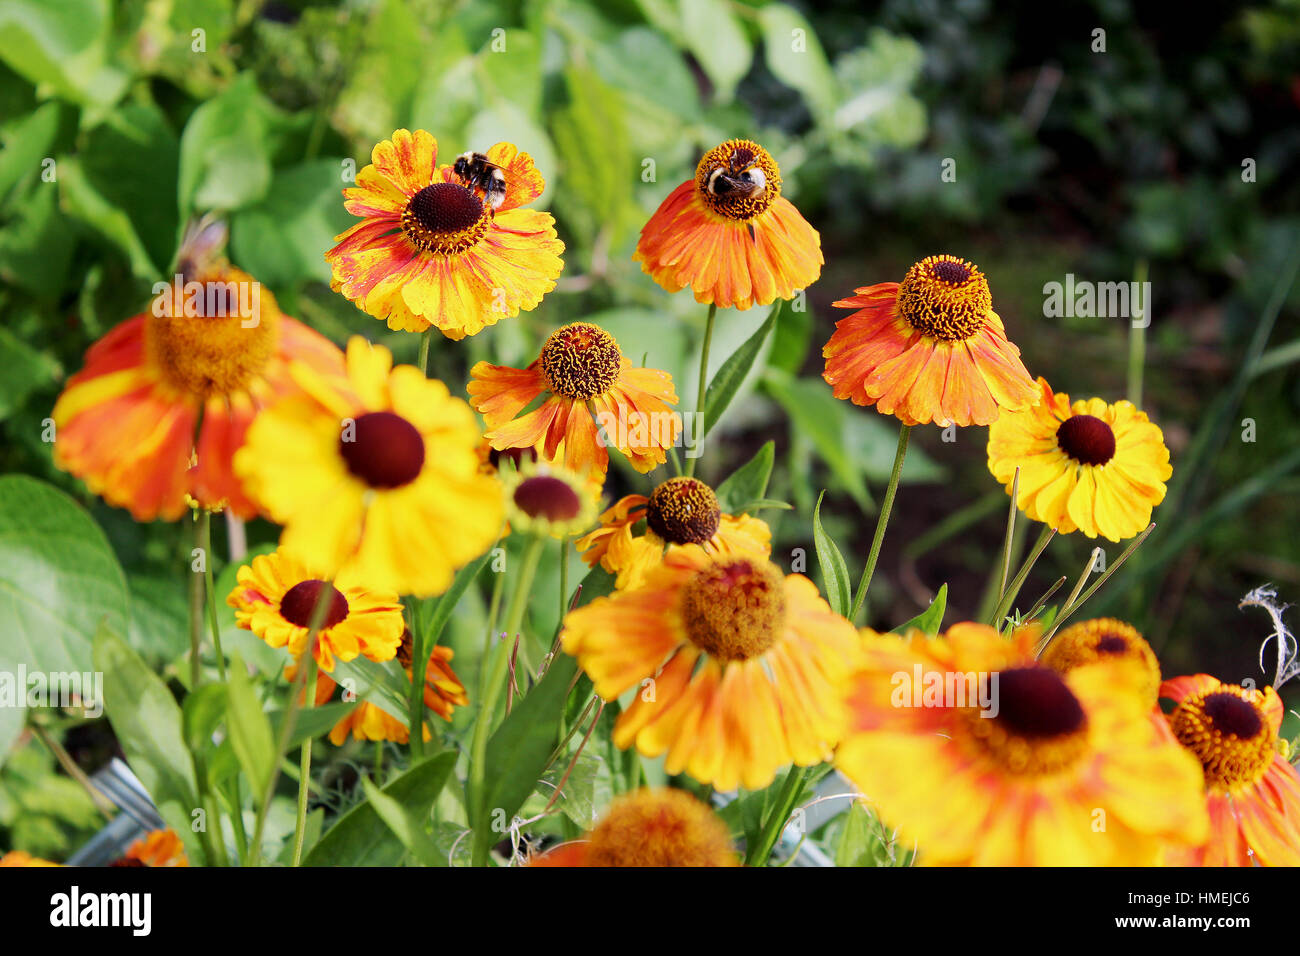 Helenium flowers with bees in a garden Stock Photo